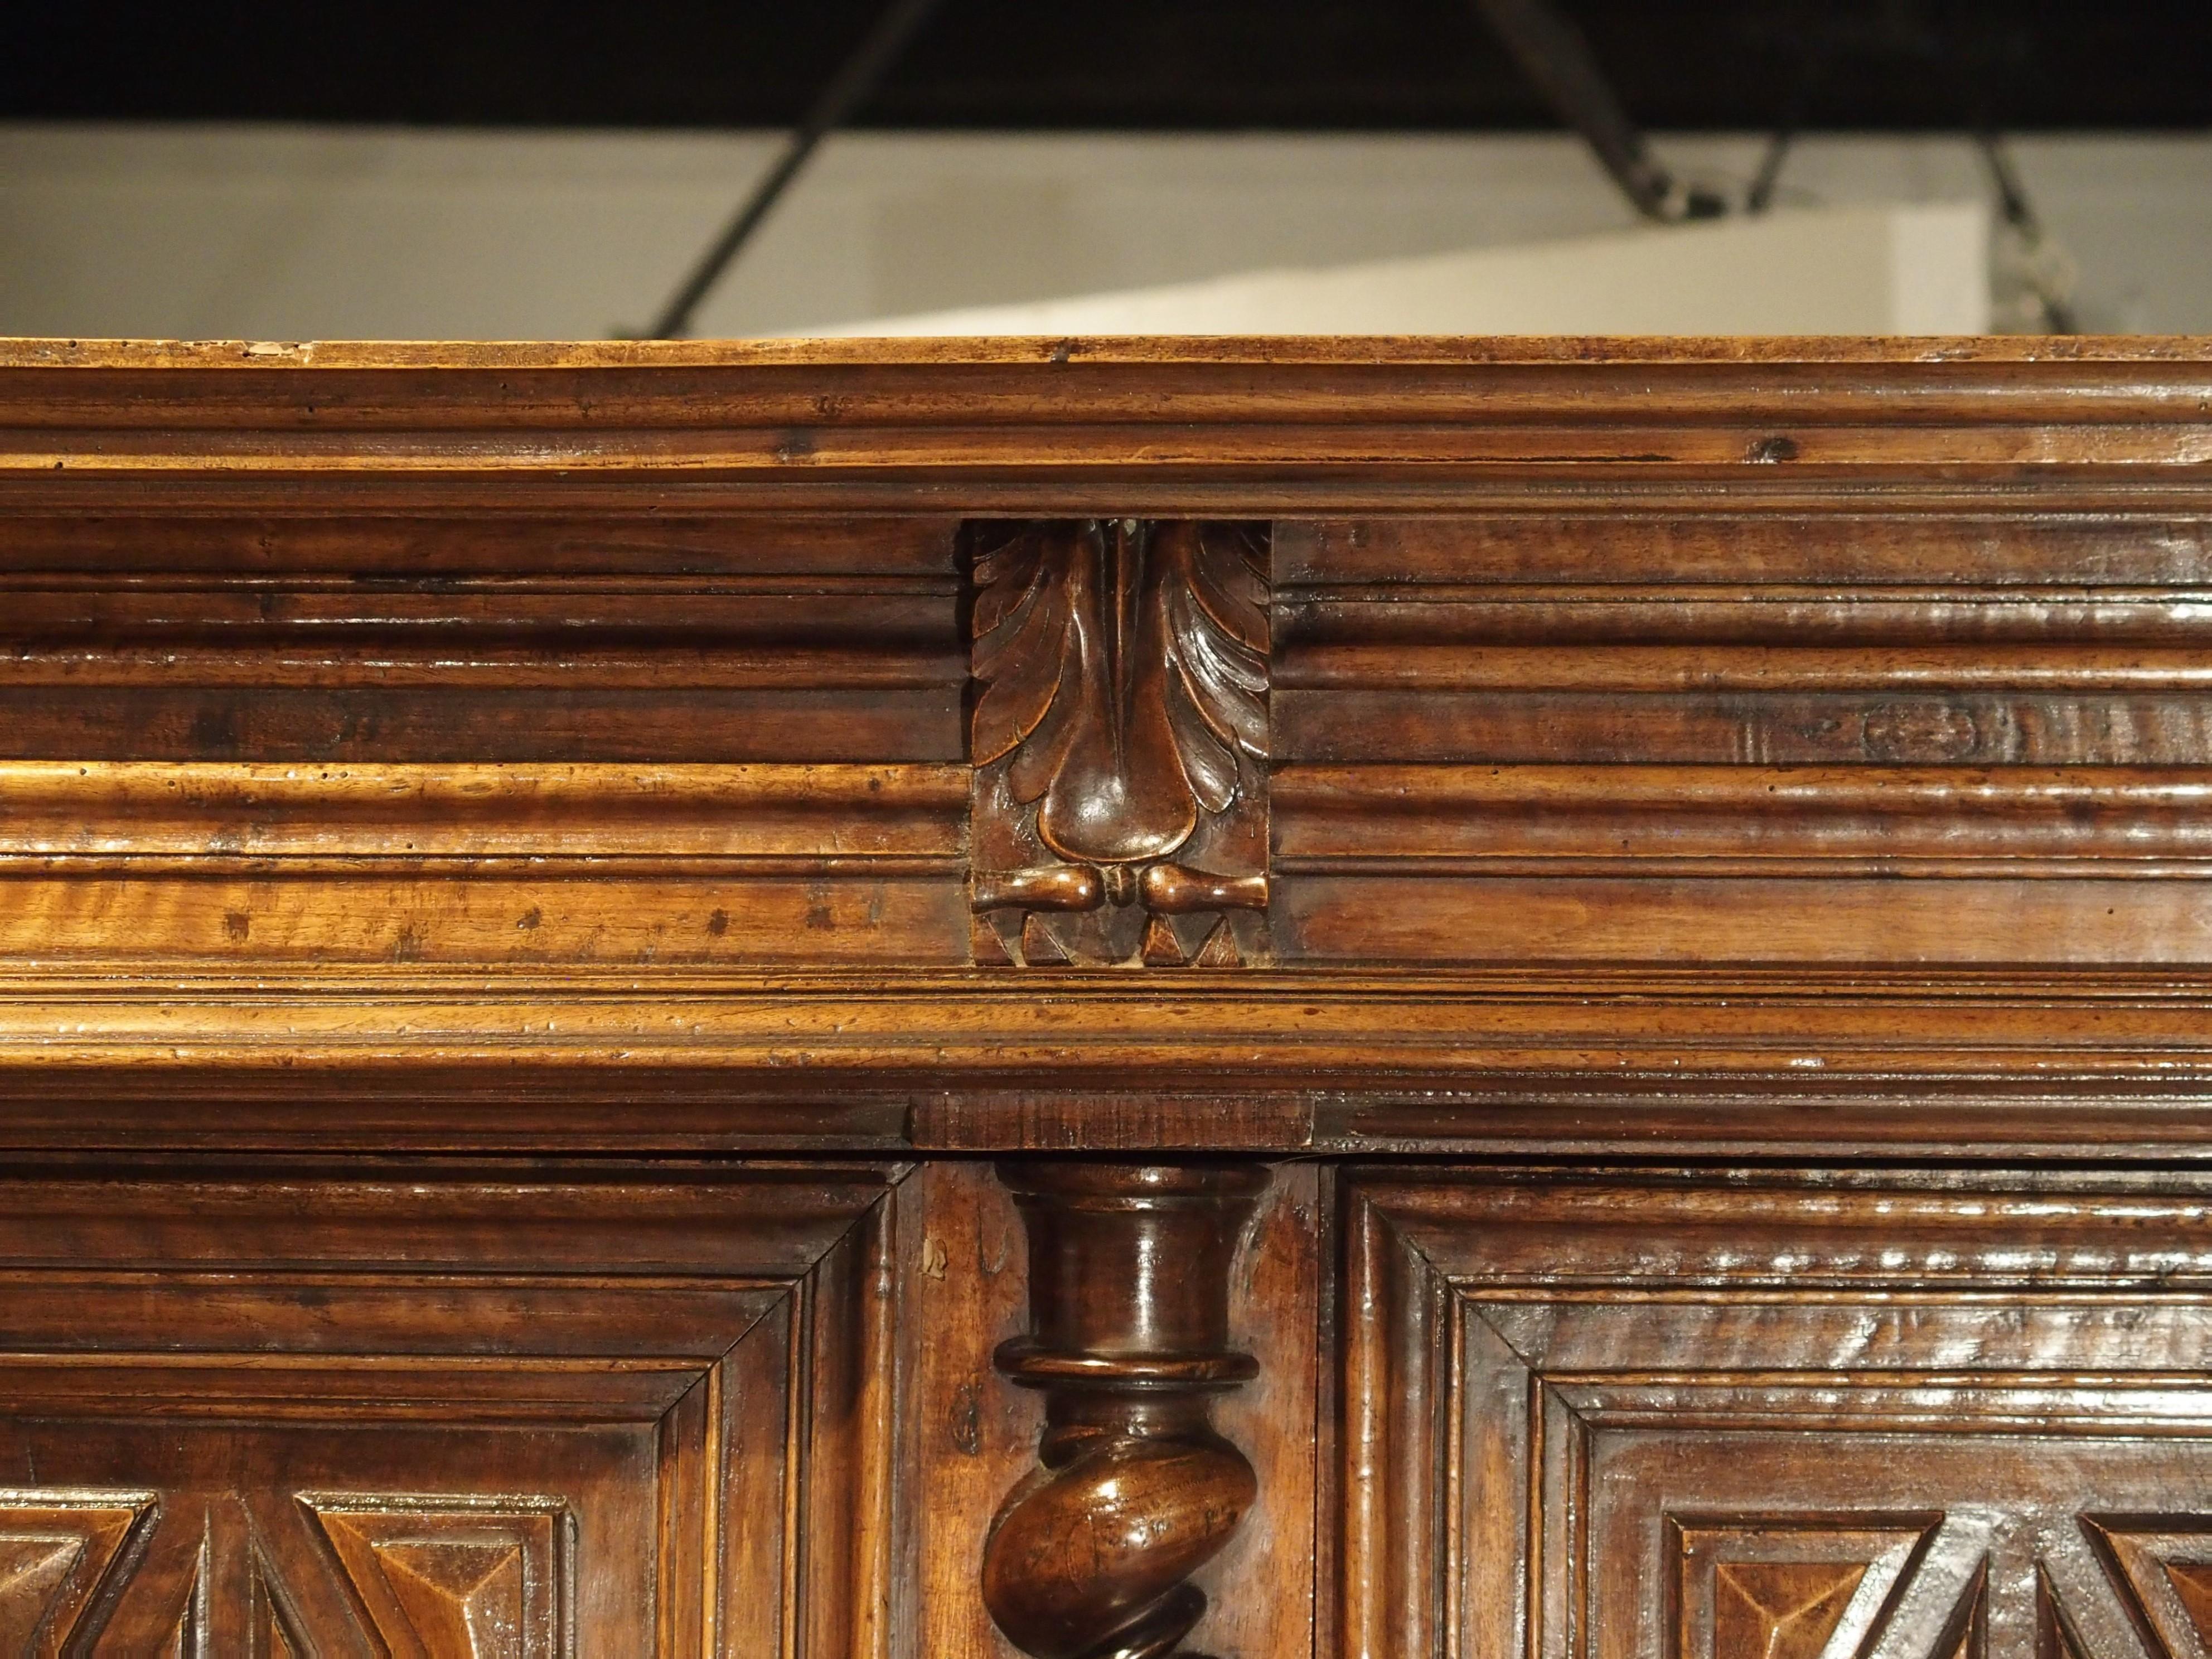 This handsome hand carved walnut buffet a deux corps comes from Southwestern France, circa 1690.

Literally, a buffet deux corps means “two body buffet”. A deux corps is a two-tiered cabinet where the upper section sits on top of the lower